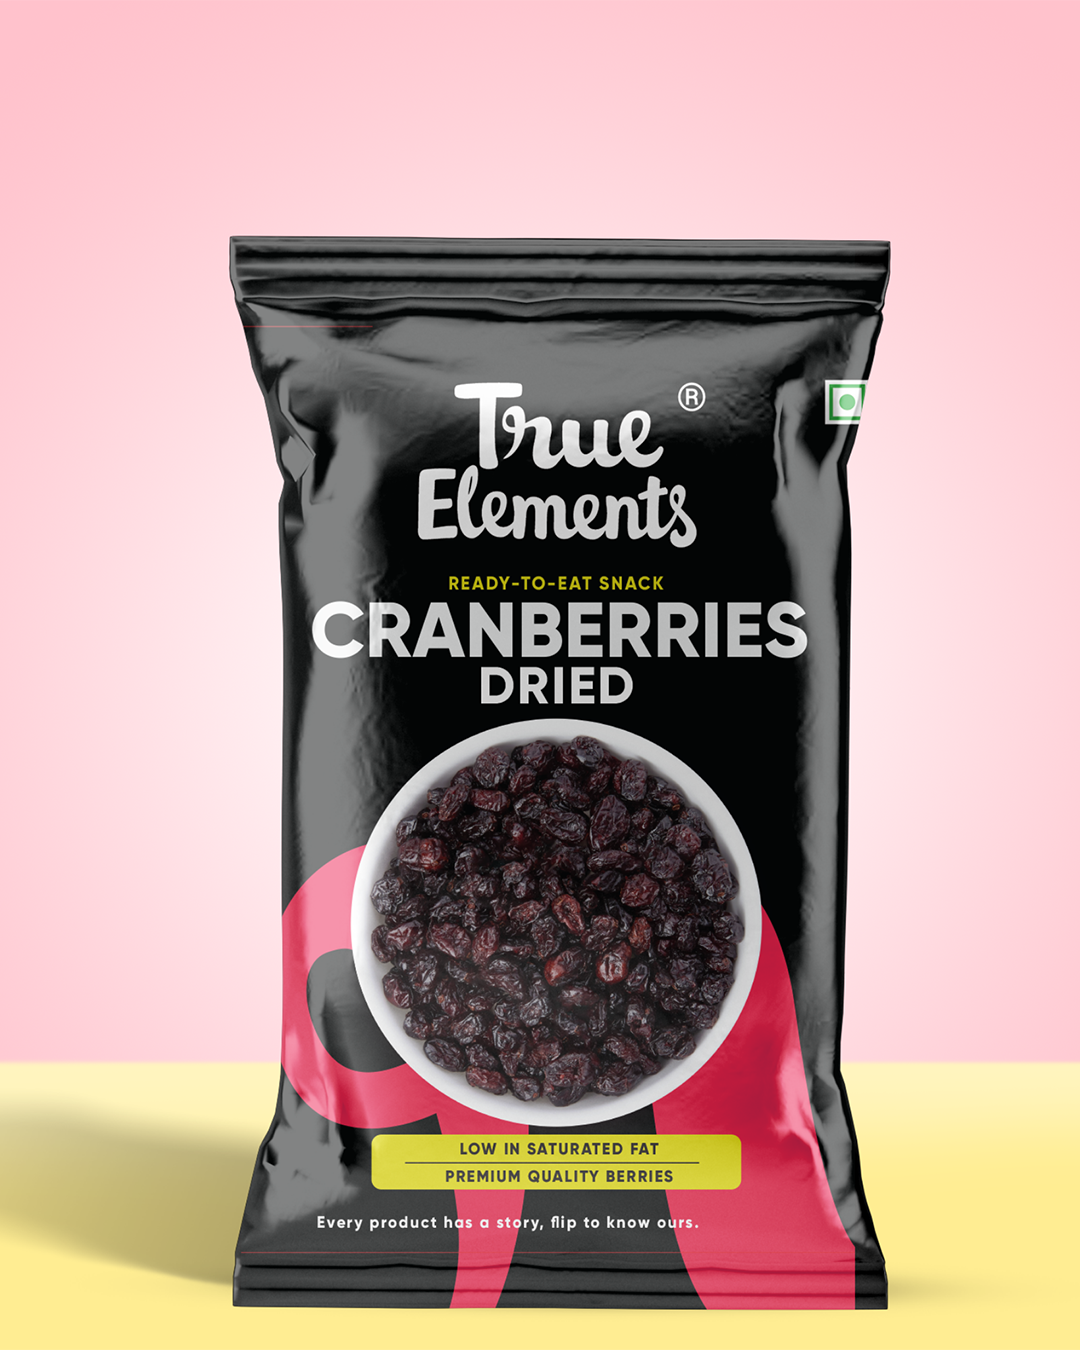 True Elements Dried Cranberries 30gm ready to eat snack